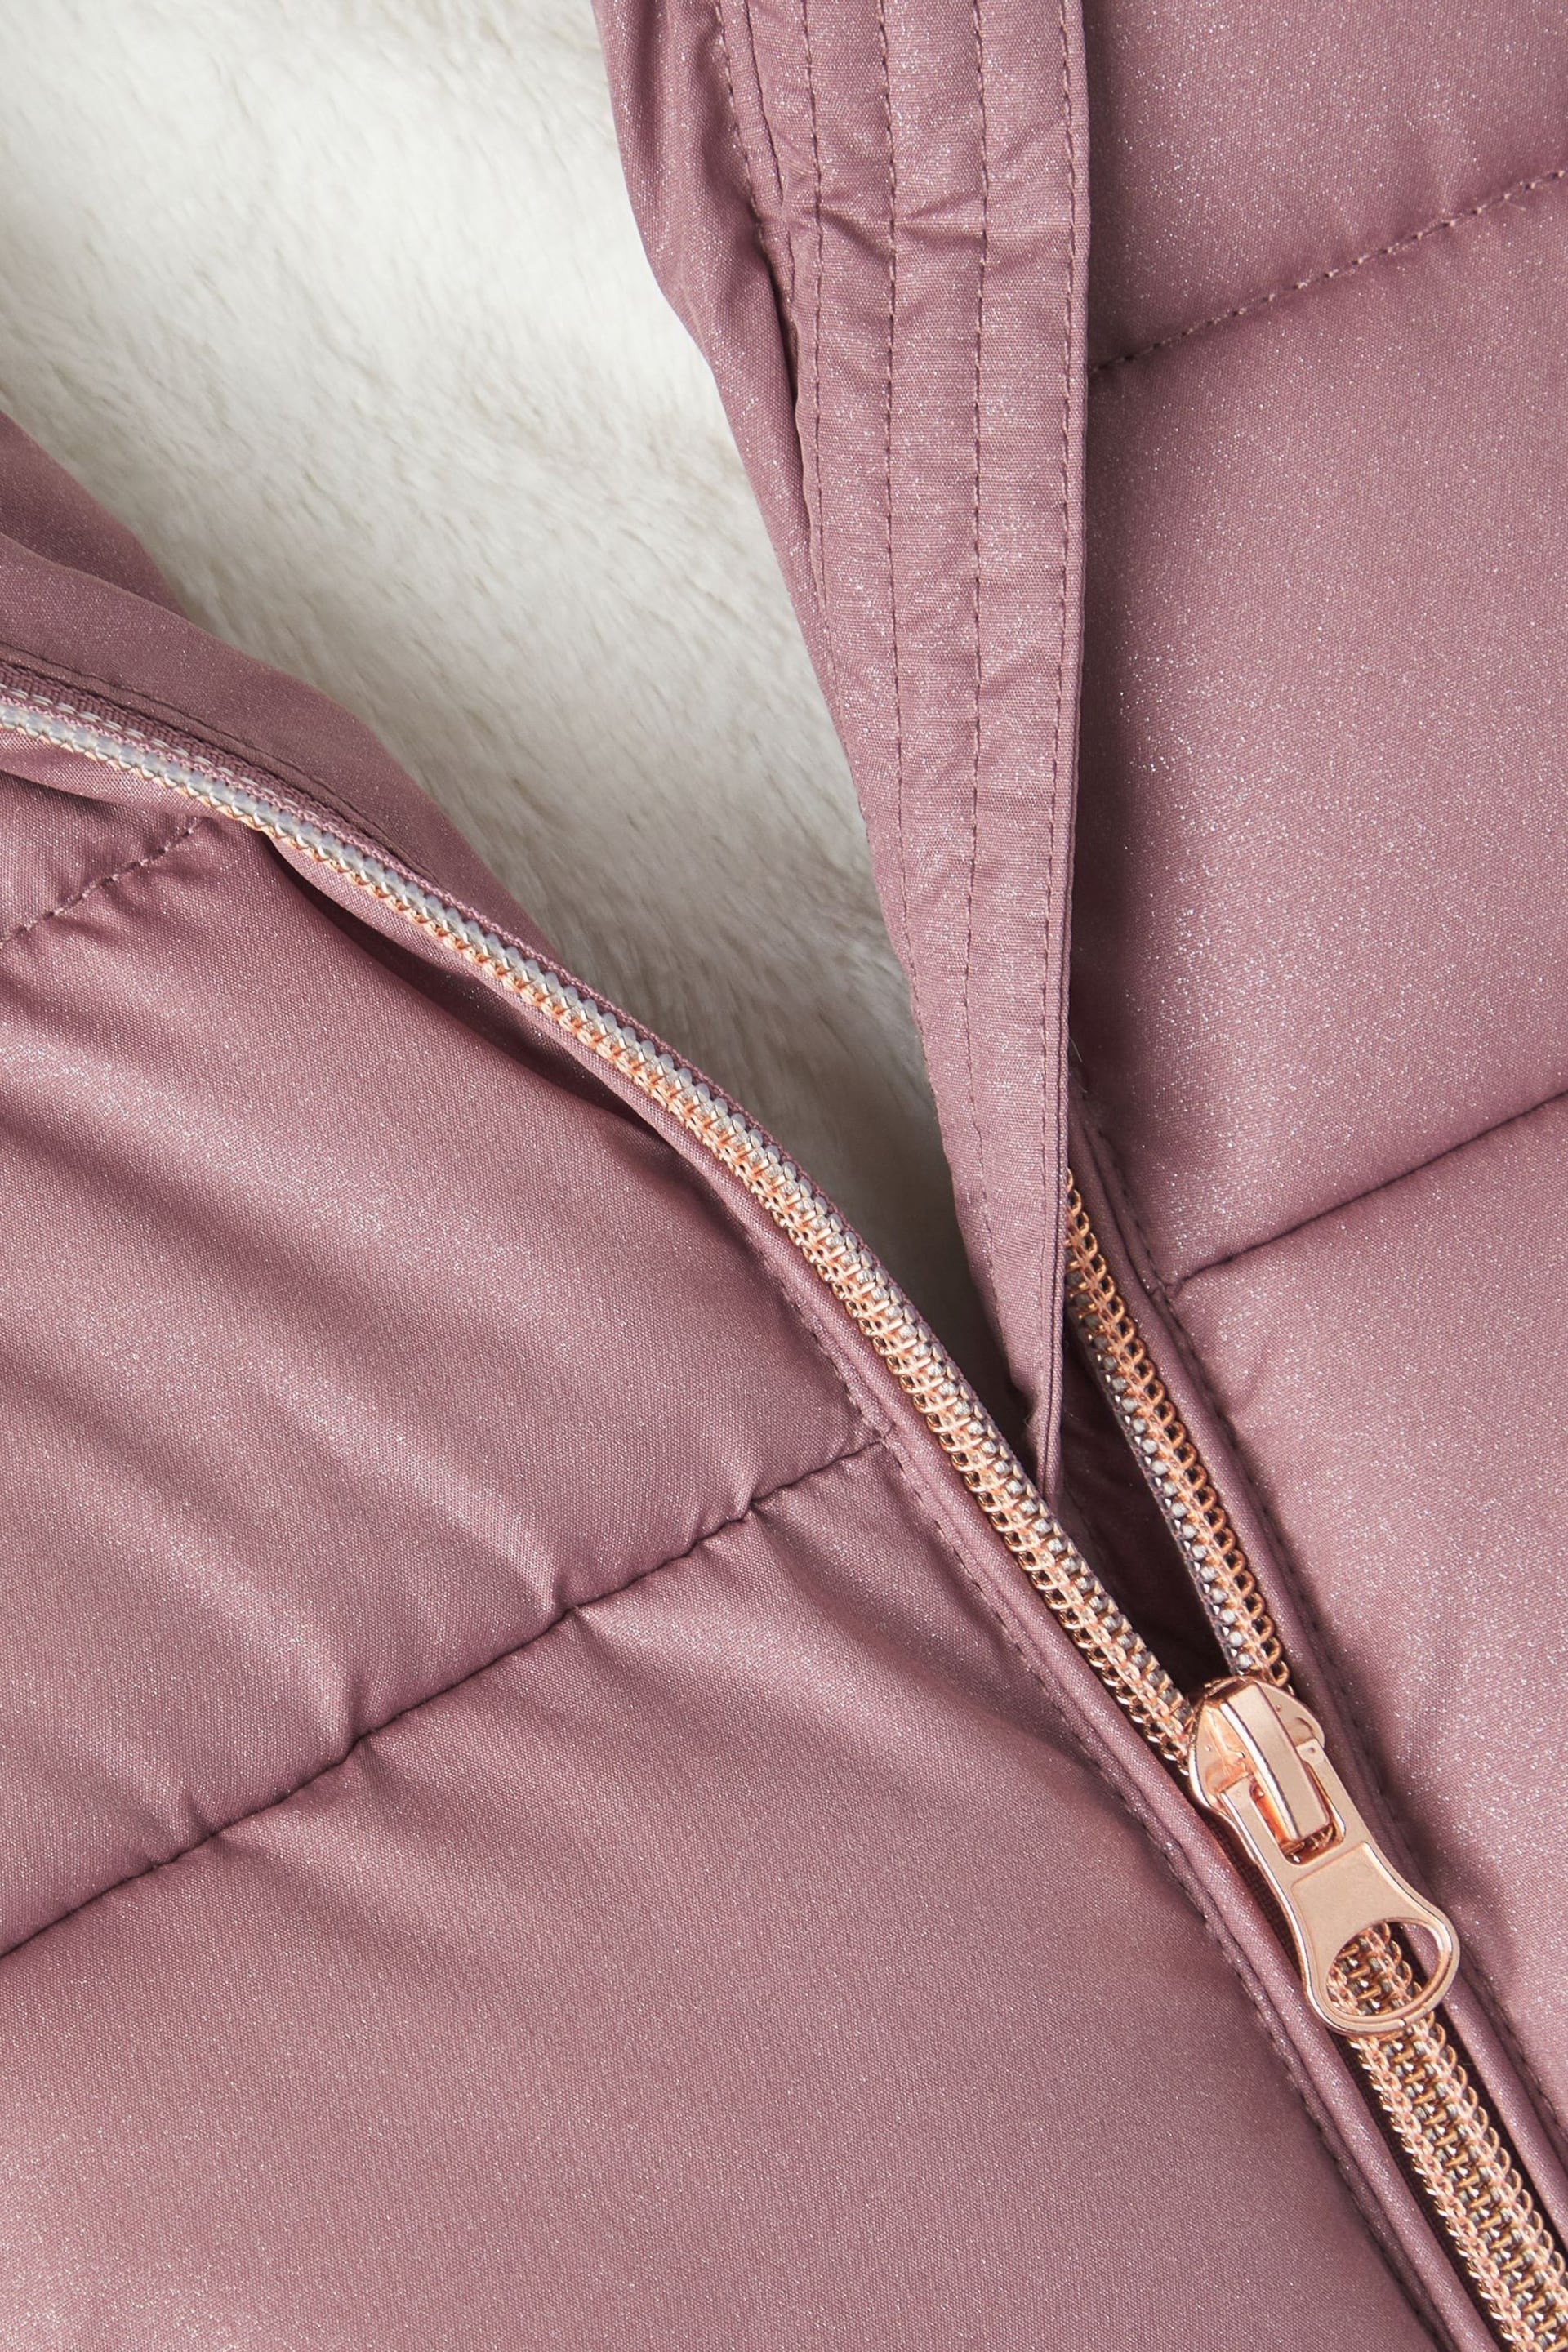 Name It Pink Glitter Padded Coat With Detachable Faux Fur Hood - Image 5 of 5